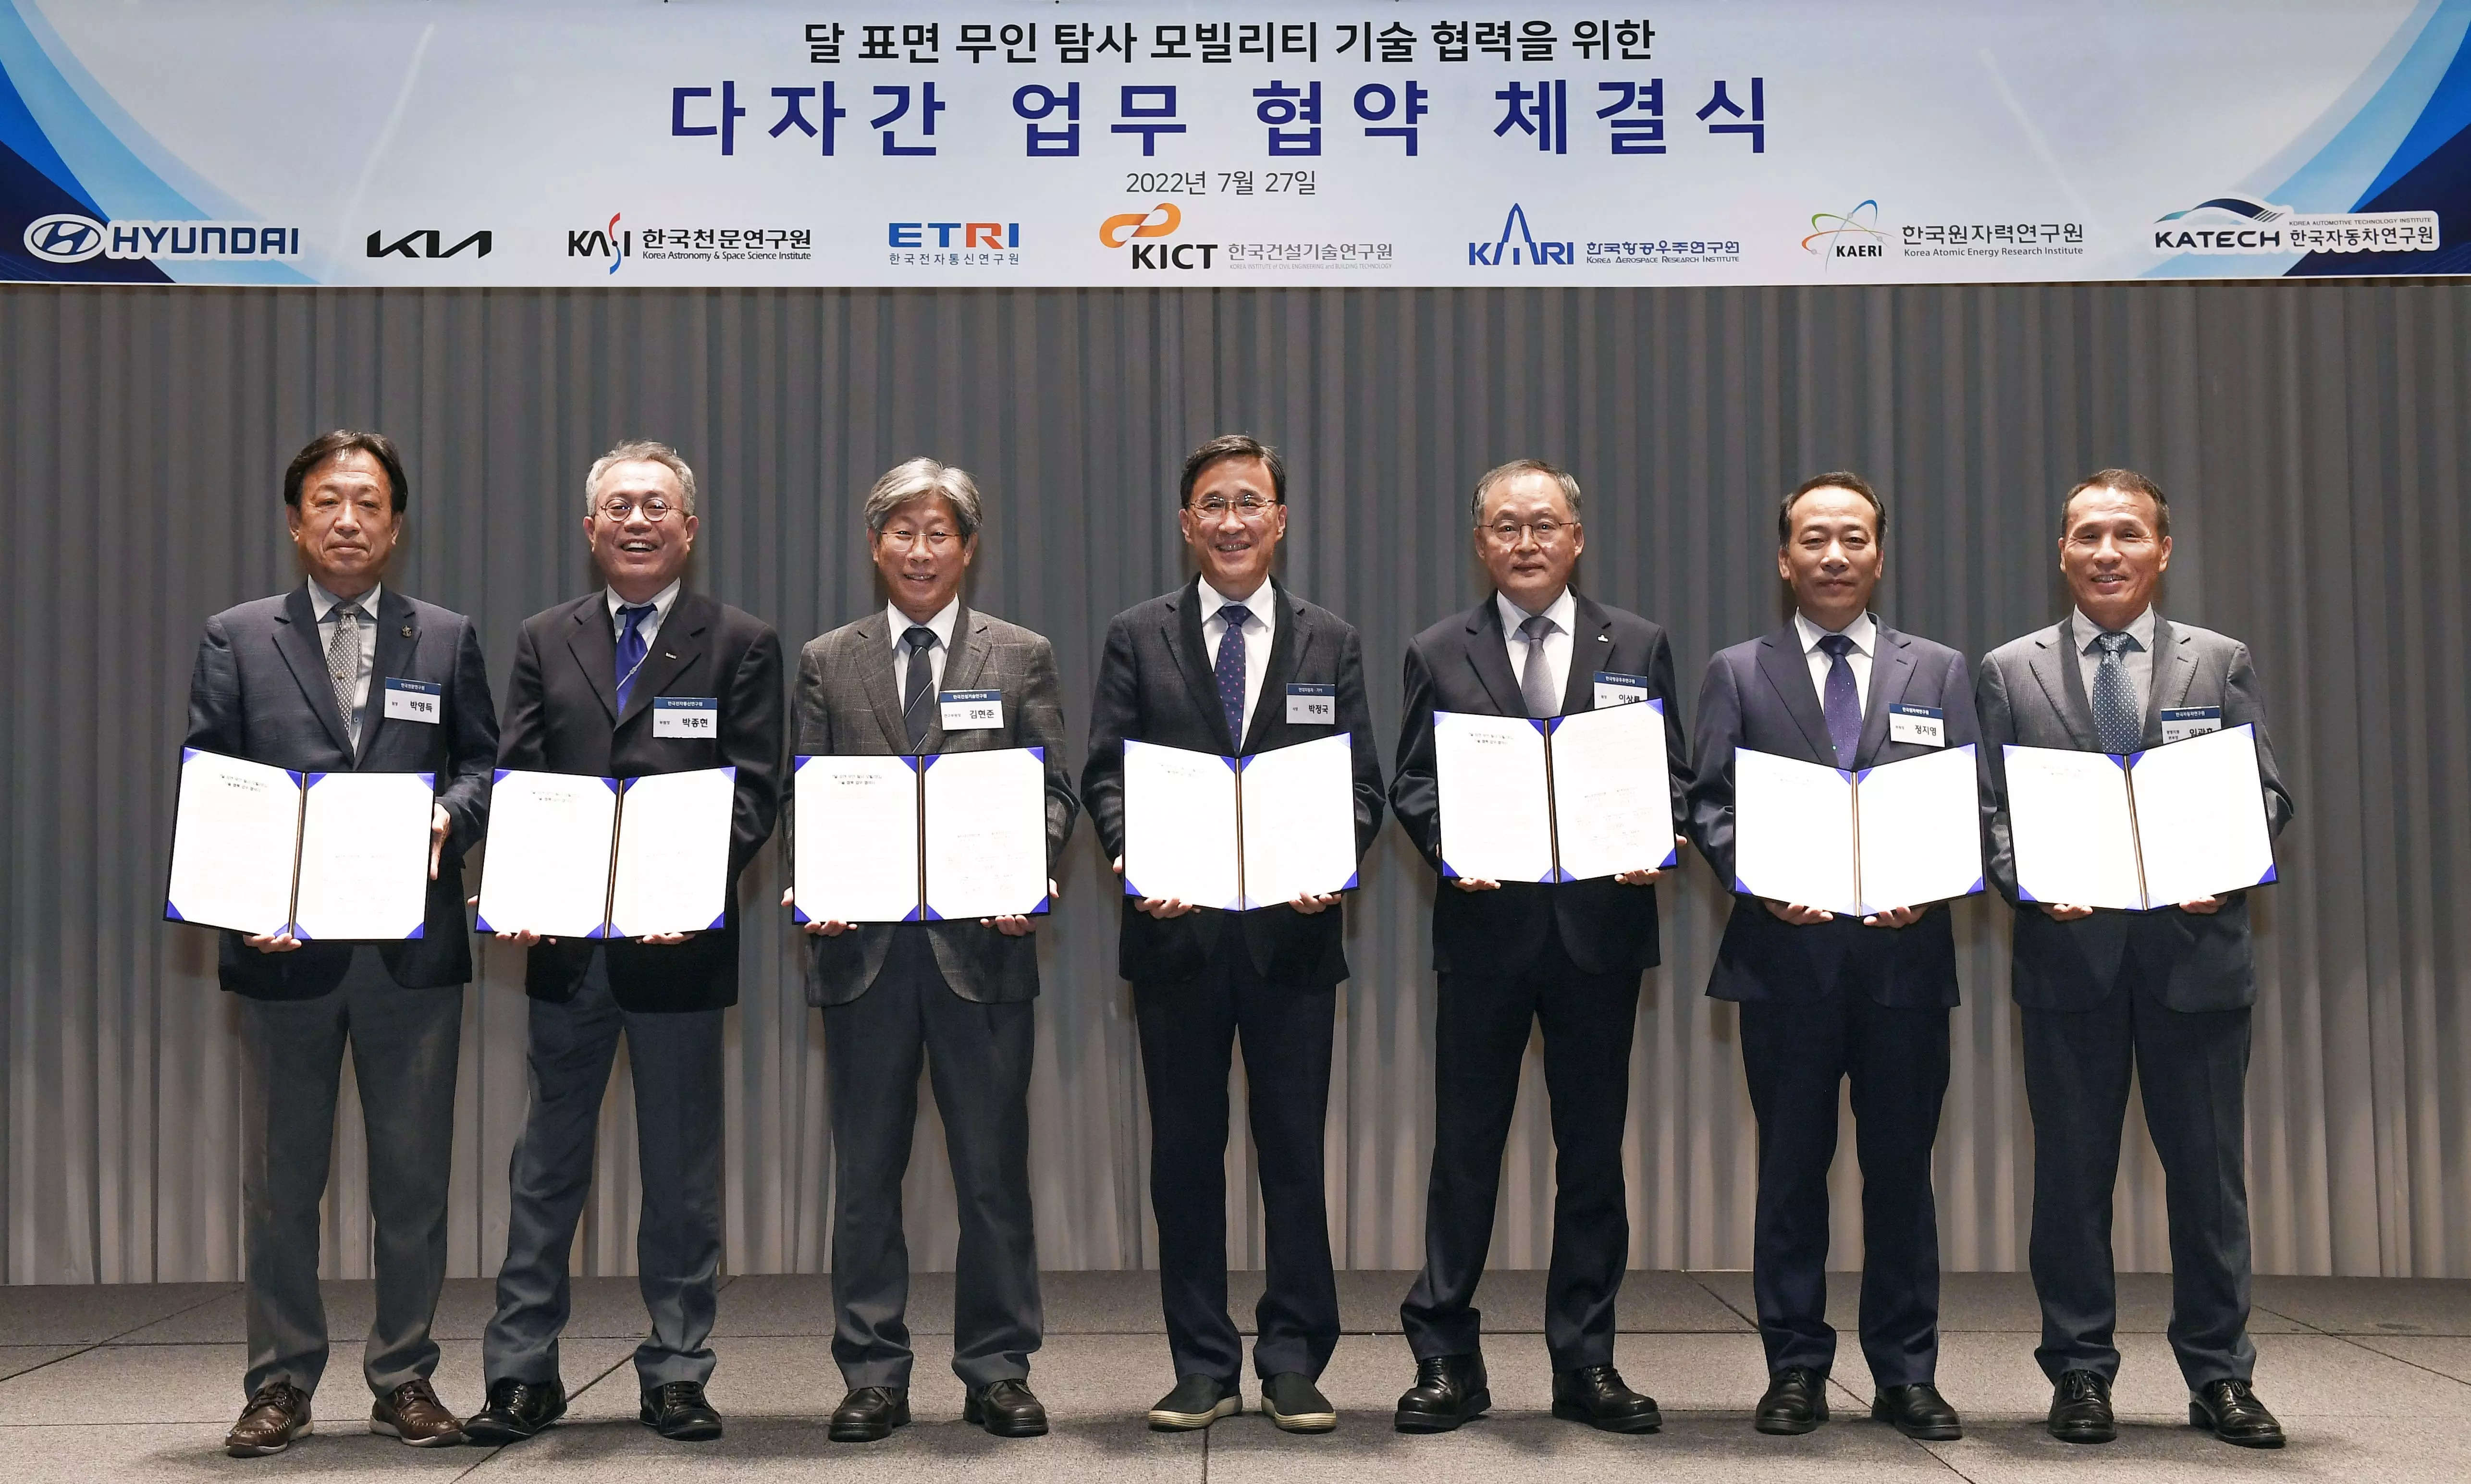  Hyundai Motor and Kia will support the consultative body with their smart mobility technologies.